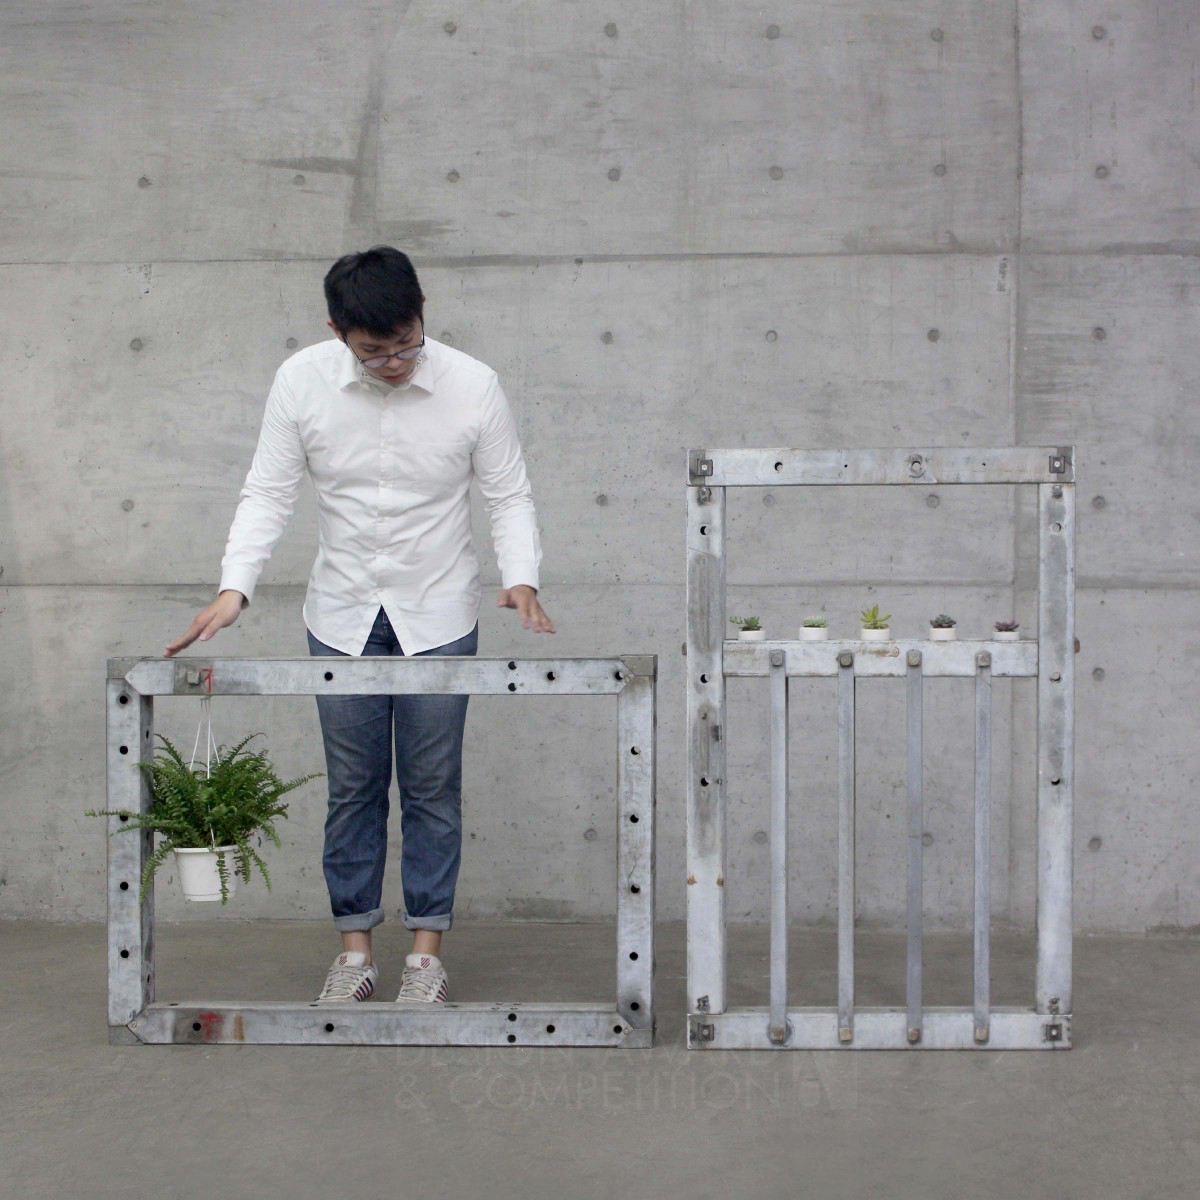 Rebloom Modularized Outdoor Frame by Victor Wu